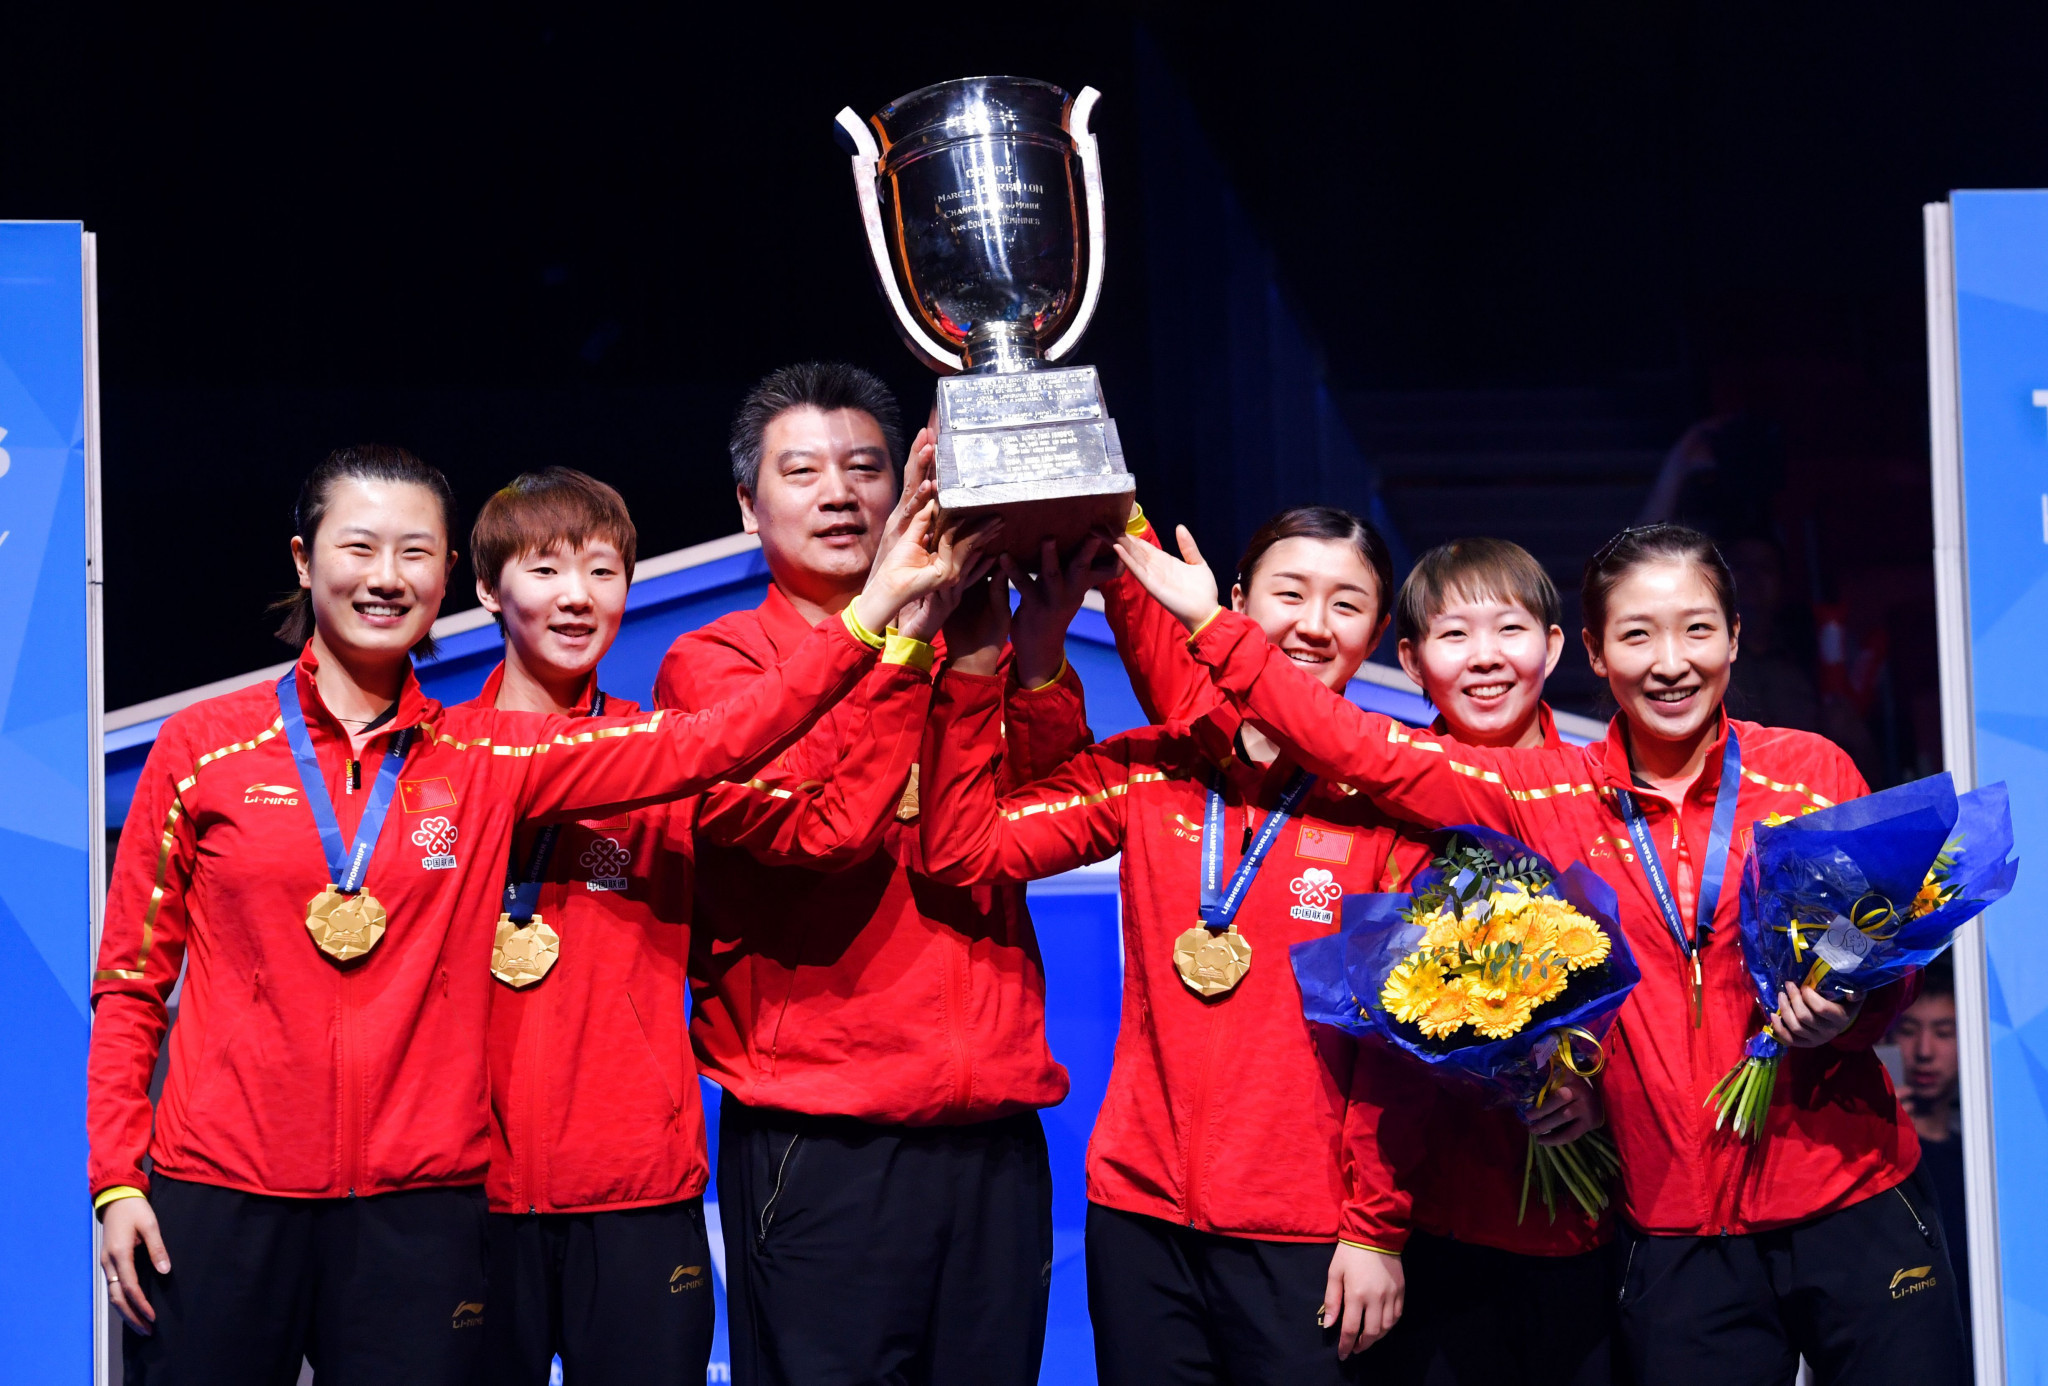 China won both titles when the World Team Table Tennis Championships last took place in 2018 ©Getty Images